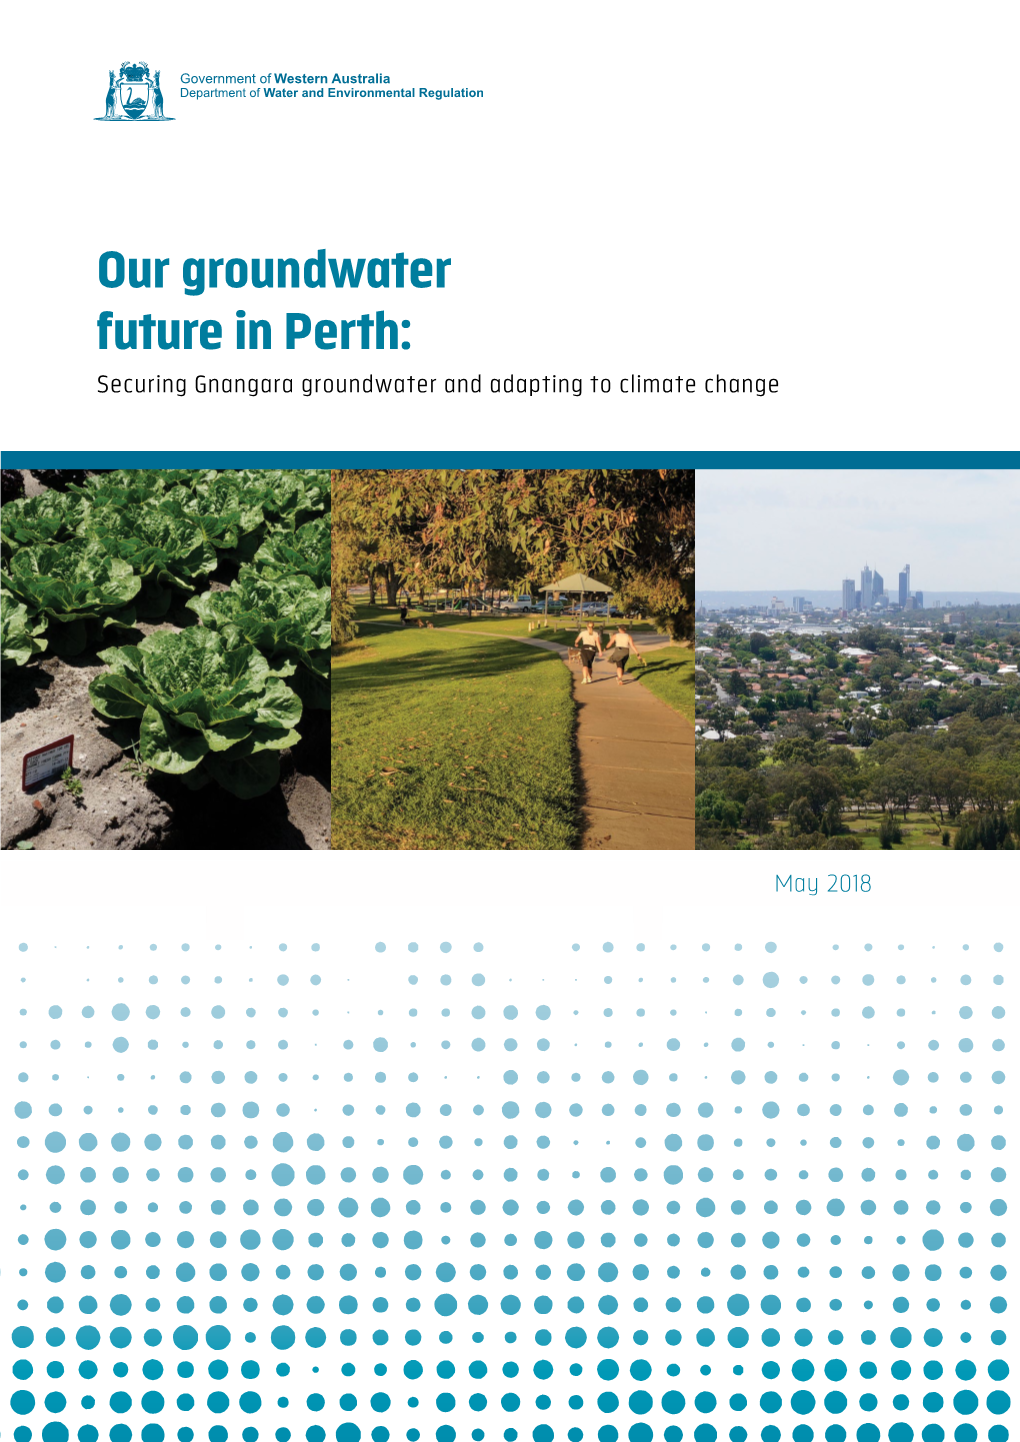 Our Groundwater Future in Perth: Securing Gnangara Groundwater and Adapting to Climate Change